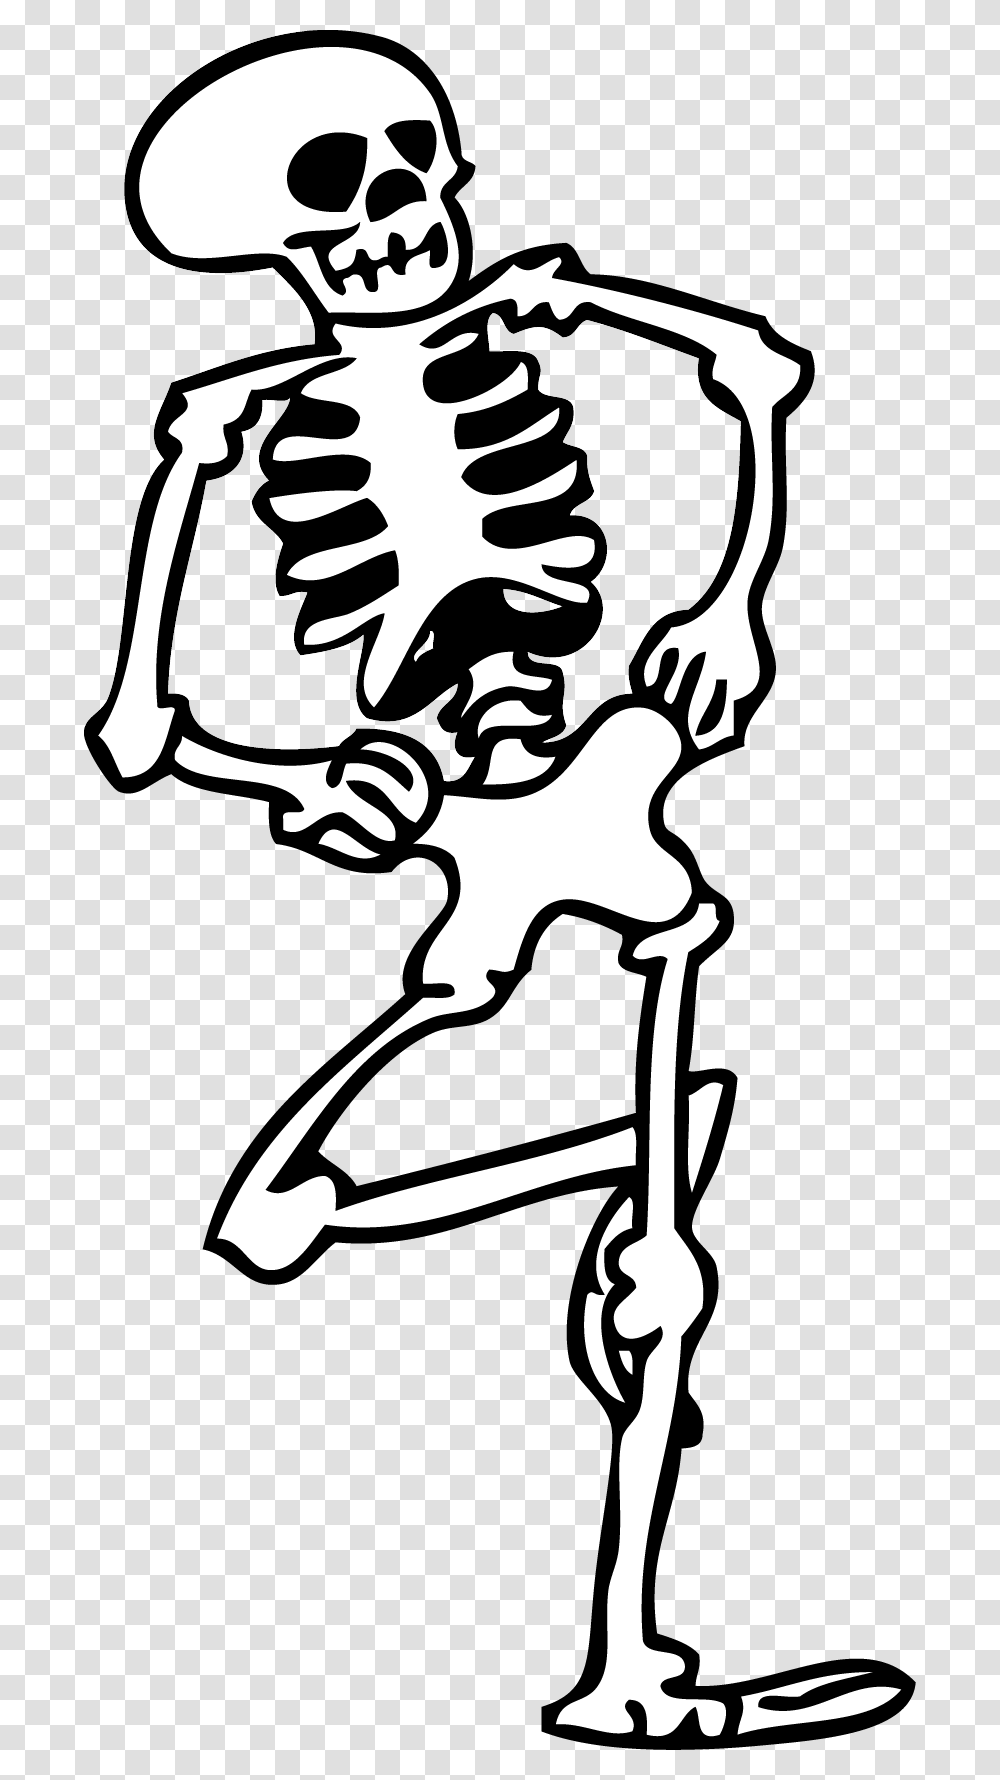 Spooky Scary Skeleton White Spooky Scary Skeletons, Stencil, Silhouette, Hand, Performer Transparent Png